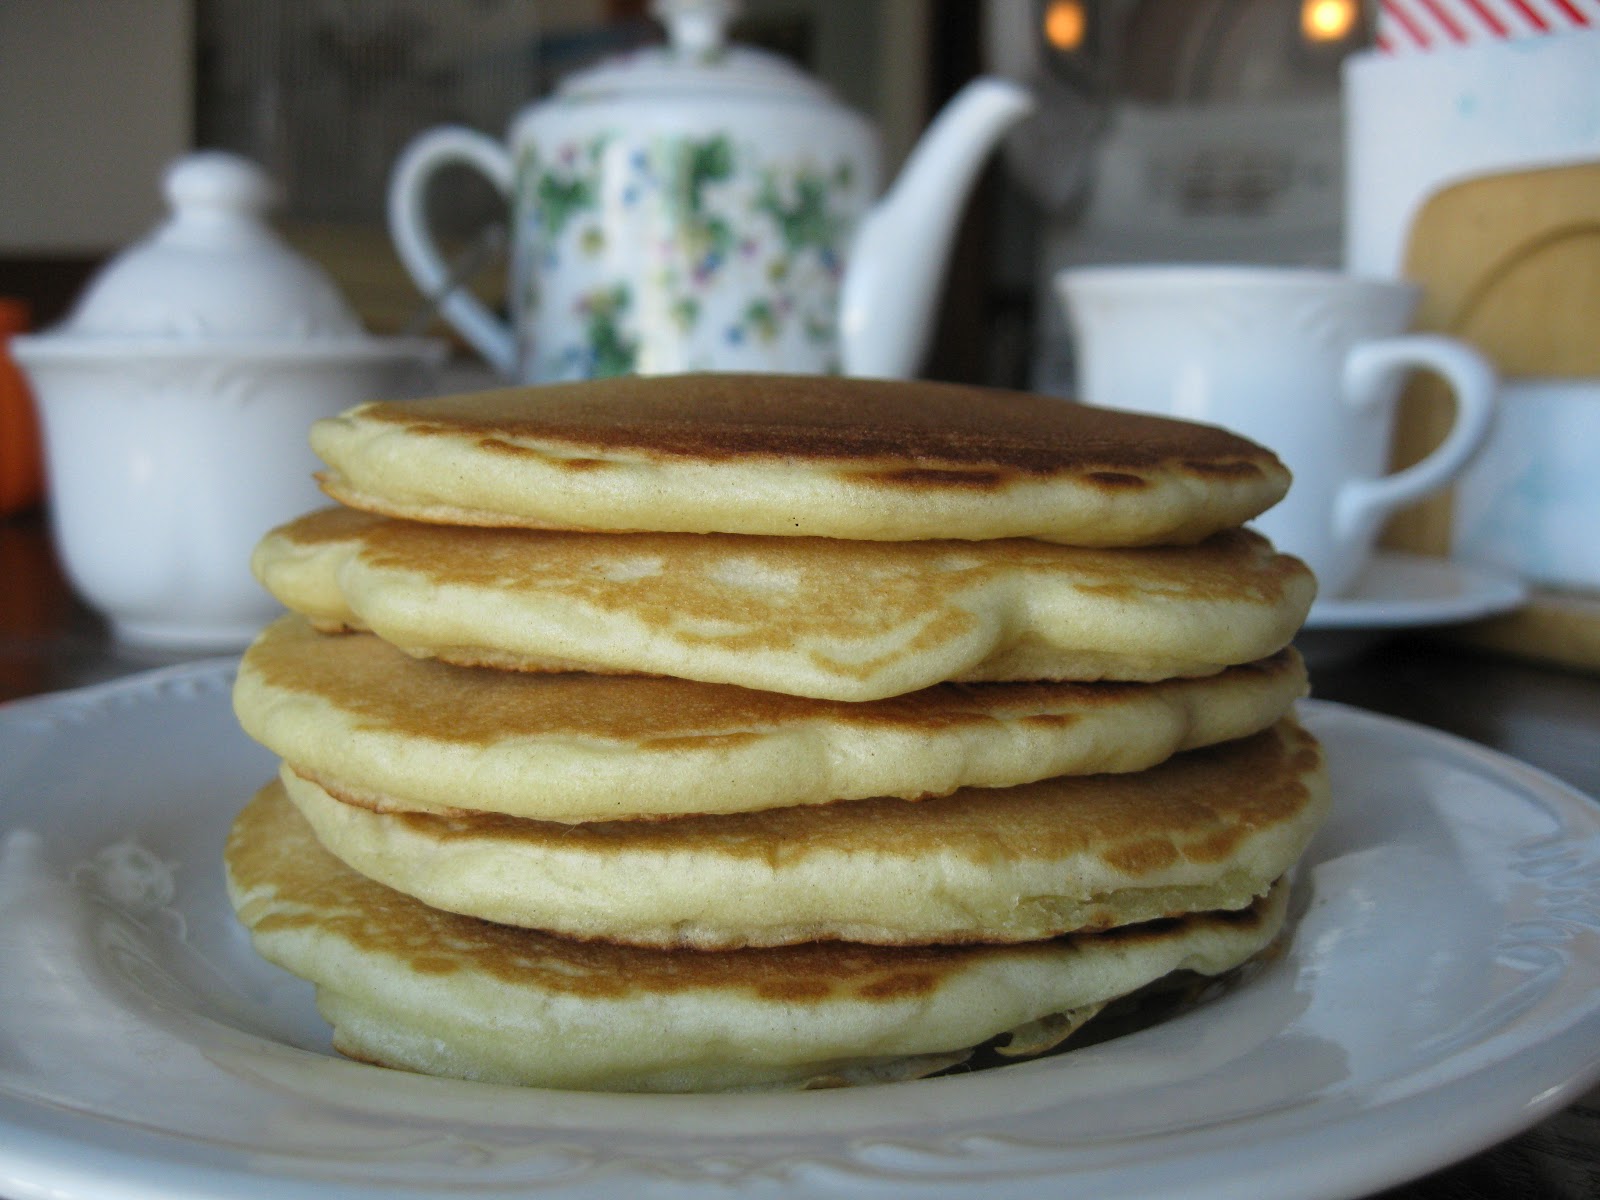 more would out to  make pancakes scratch of check baking how you made   blog like my If recipes, scratch